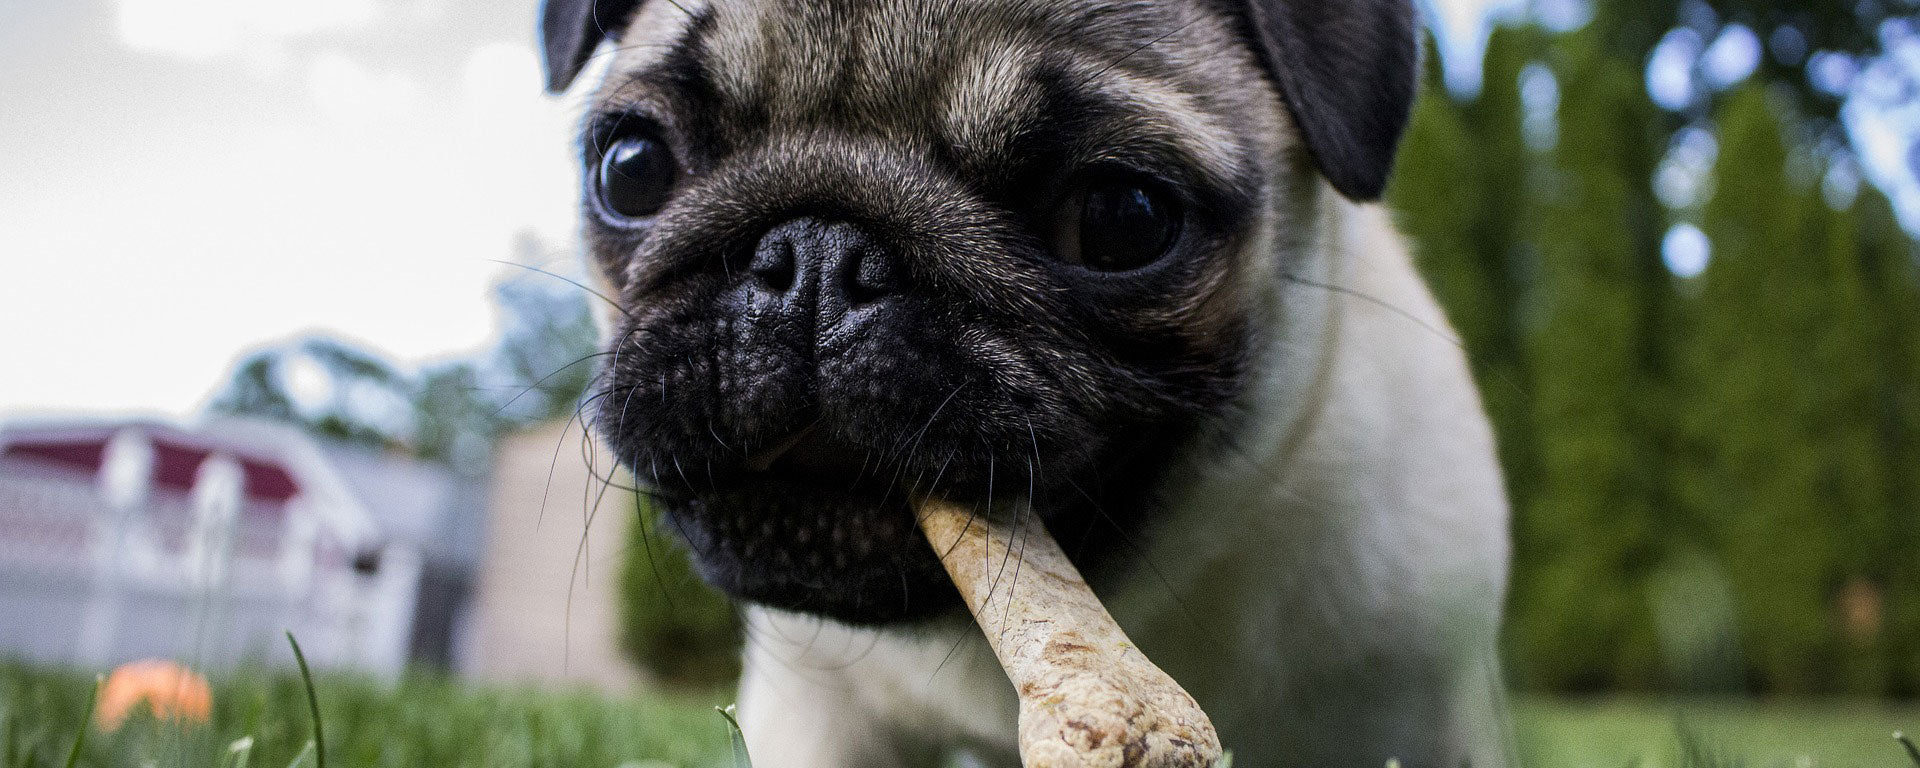 Pug holding a milkbone treat in its mouth